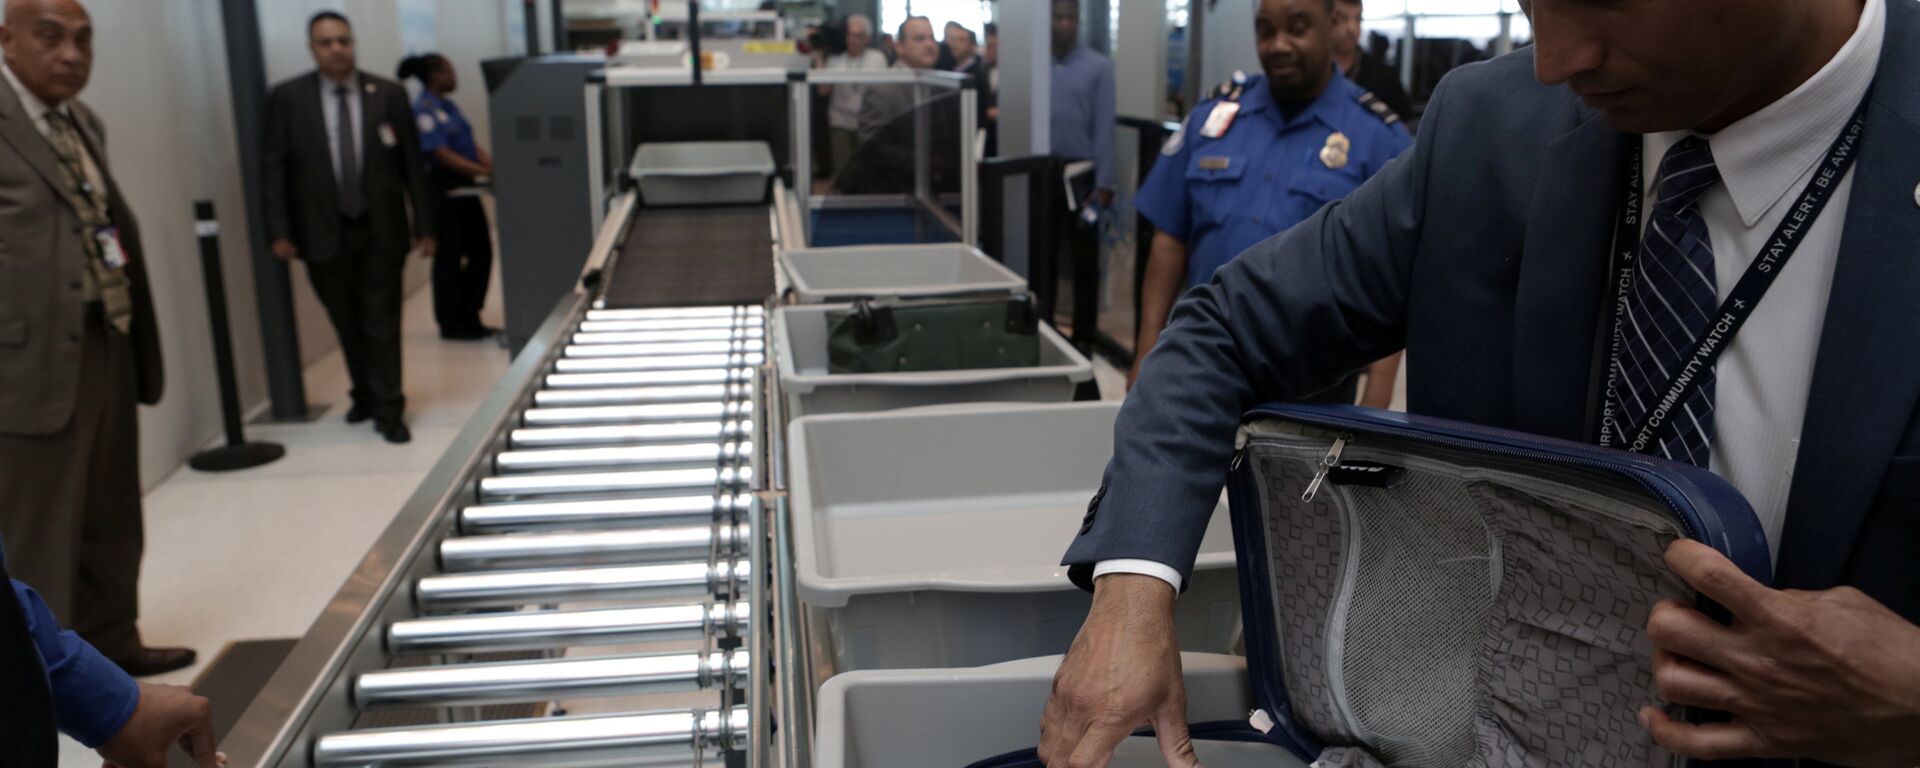 A TSA official removes a laptop from a bag for scanning using the Transport Security Administration's new Automated Screening Lane technology at Terminal 4 of JFK airport in New York City, U.S., May 17, 2017 - Sputnik International, 1920, 14.12.2021